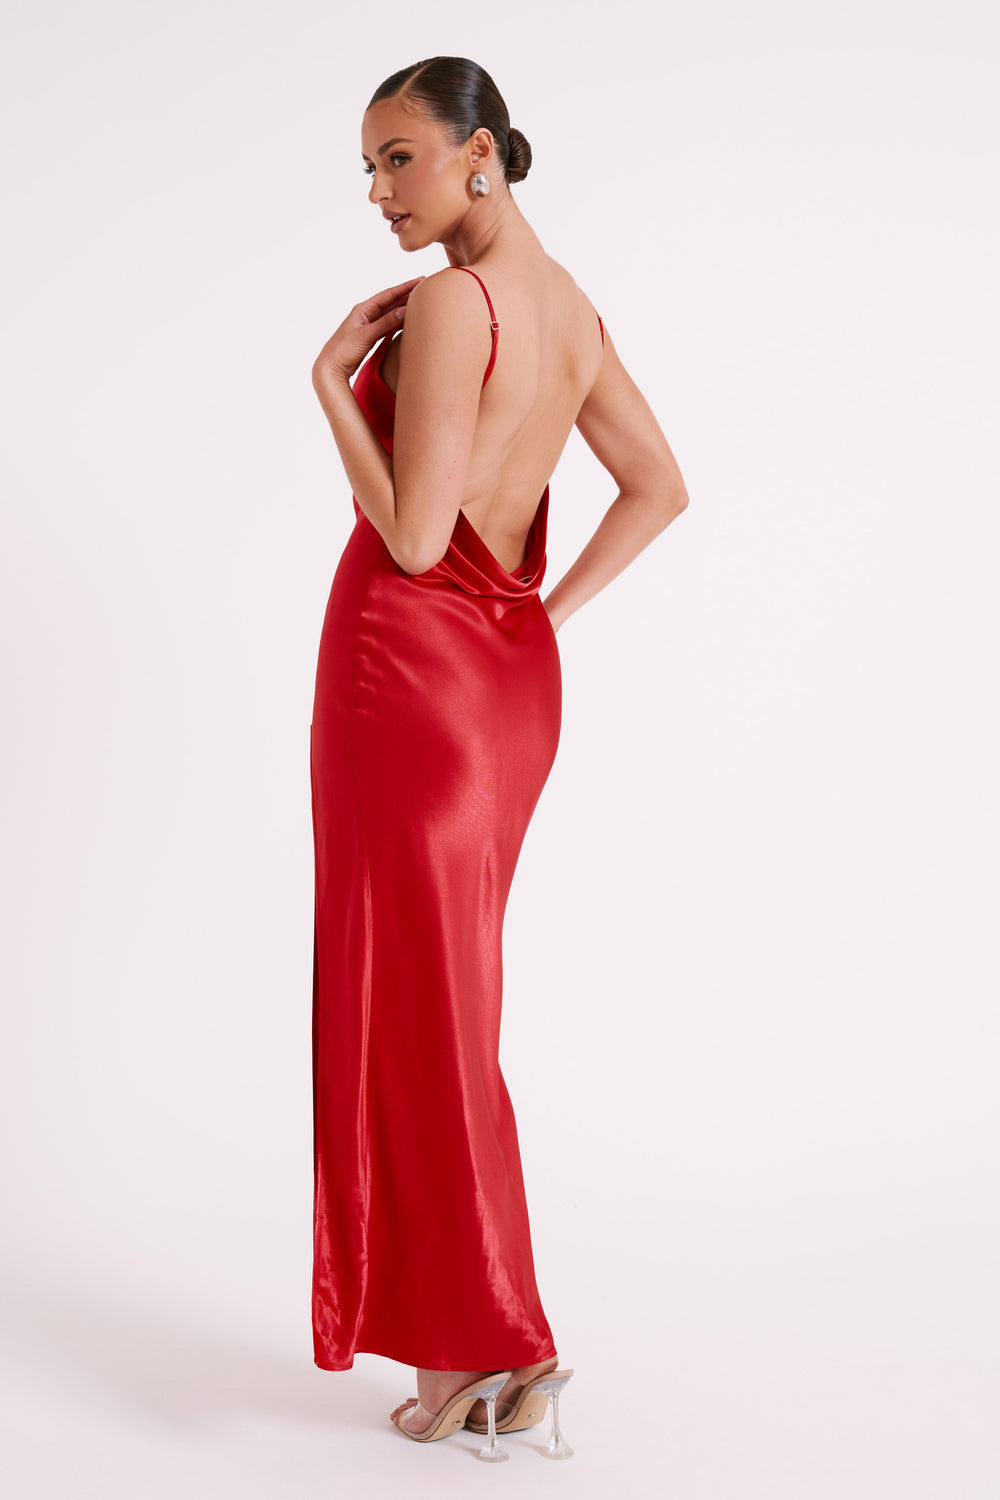 Jade Cowl Neck Backless Maxi Dress - Red